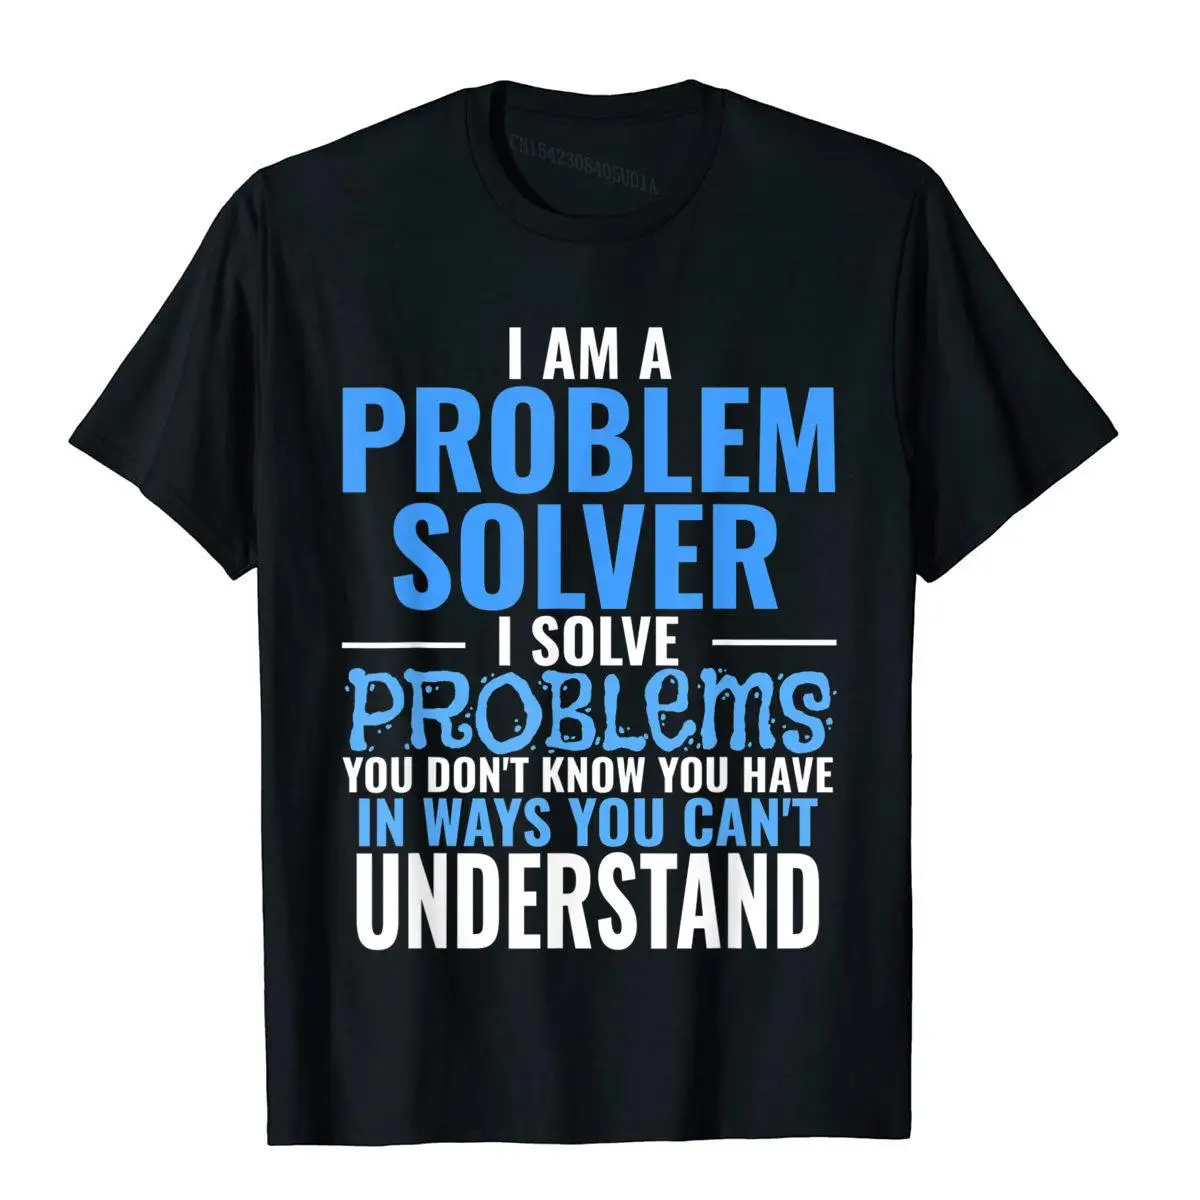 Problem Solve Problems You Don't Know You Have T Shirt B__B8098black